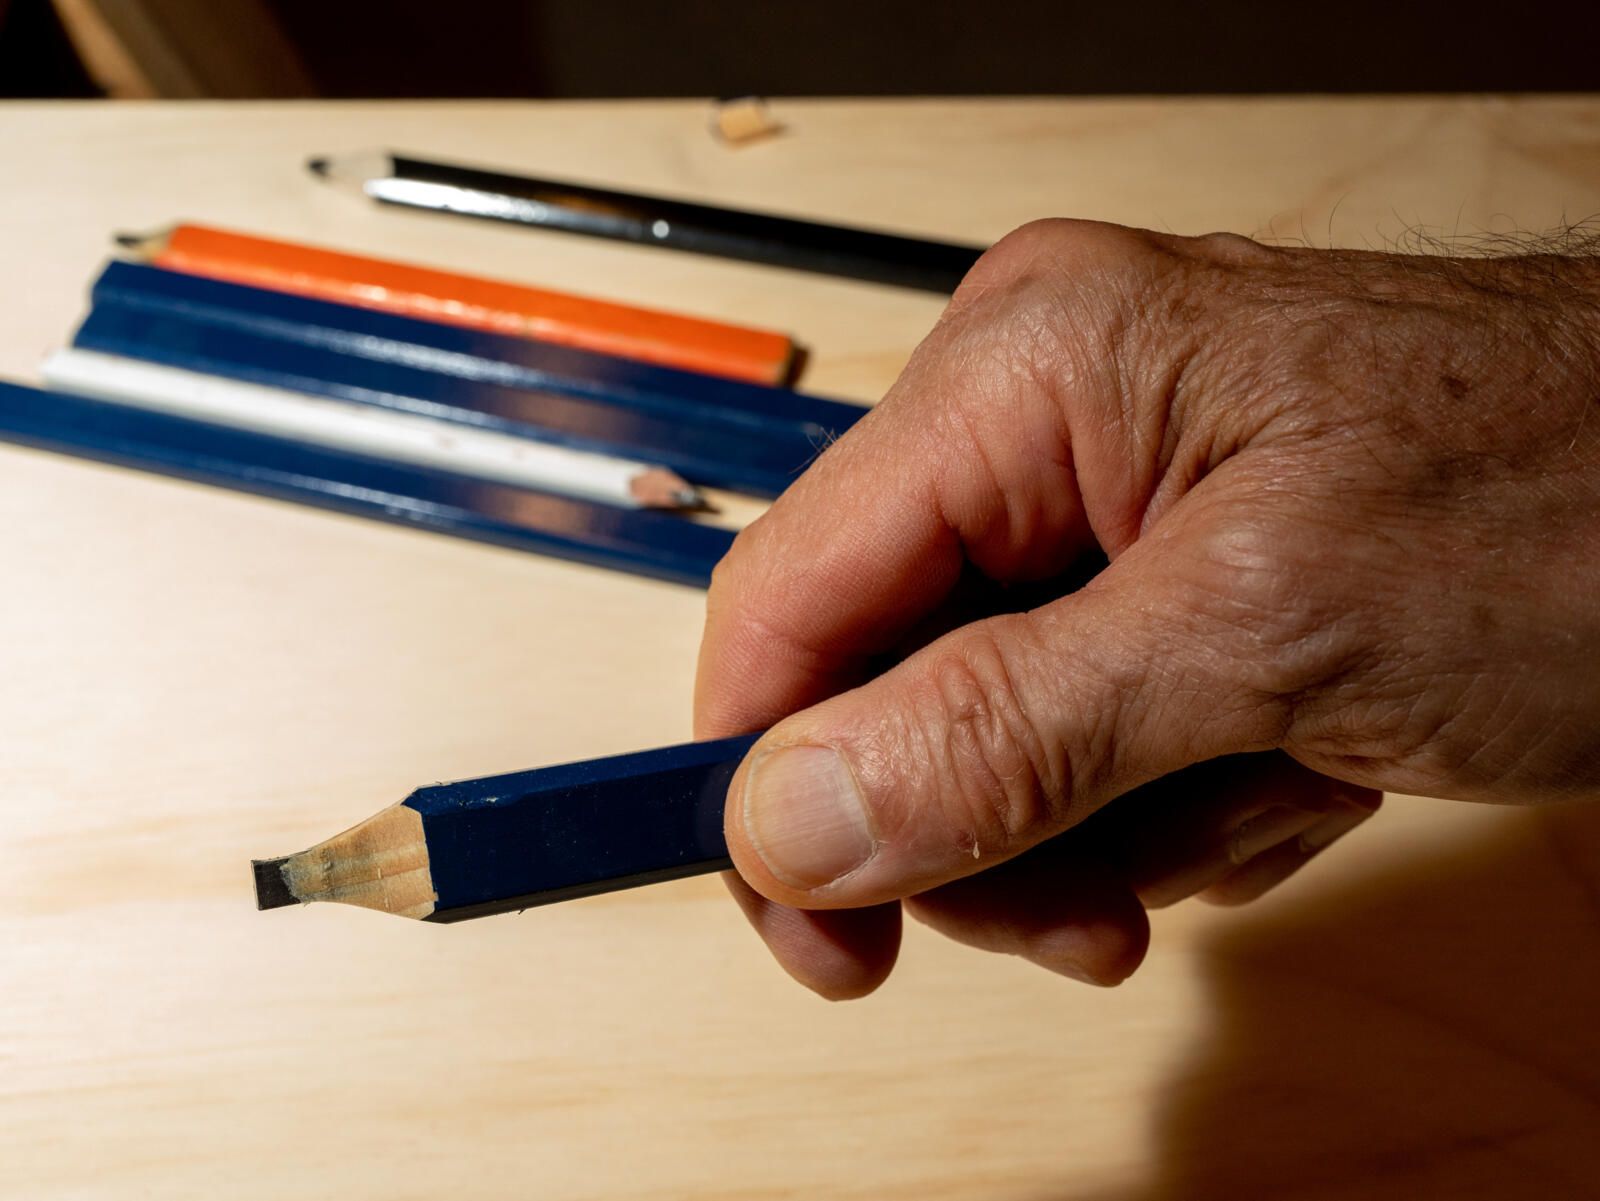 How To Sharpen A Construction Pencil